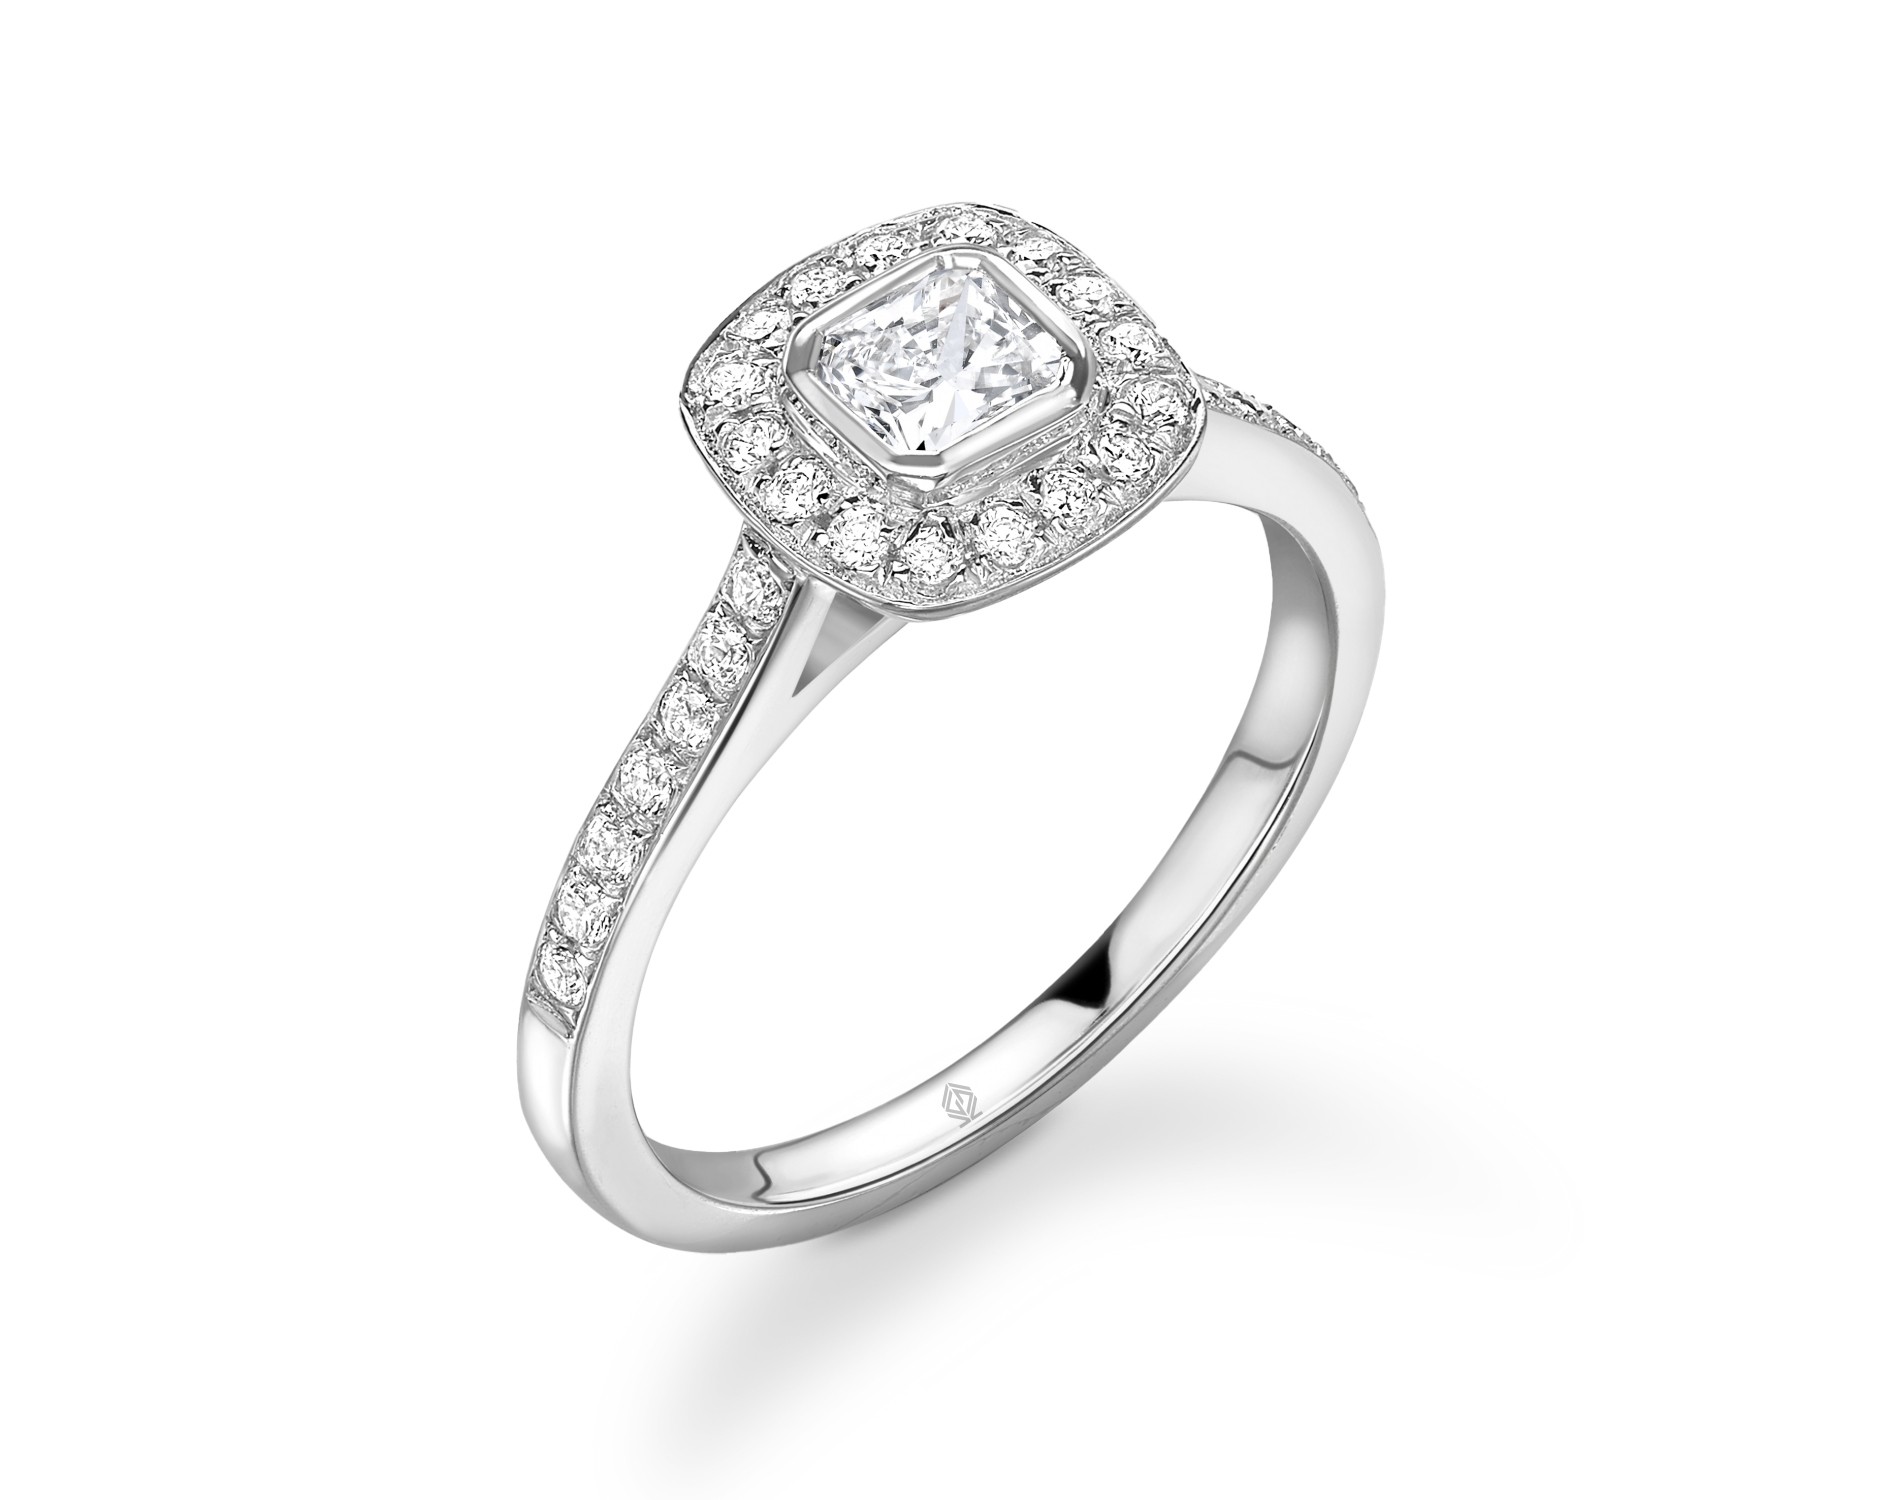 18K WHITE GOLD CUSHION CUT HALO DIAMOND ENGAGEMENT RING WITH SIDE STONES CHANNEL SET